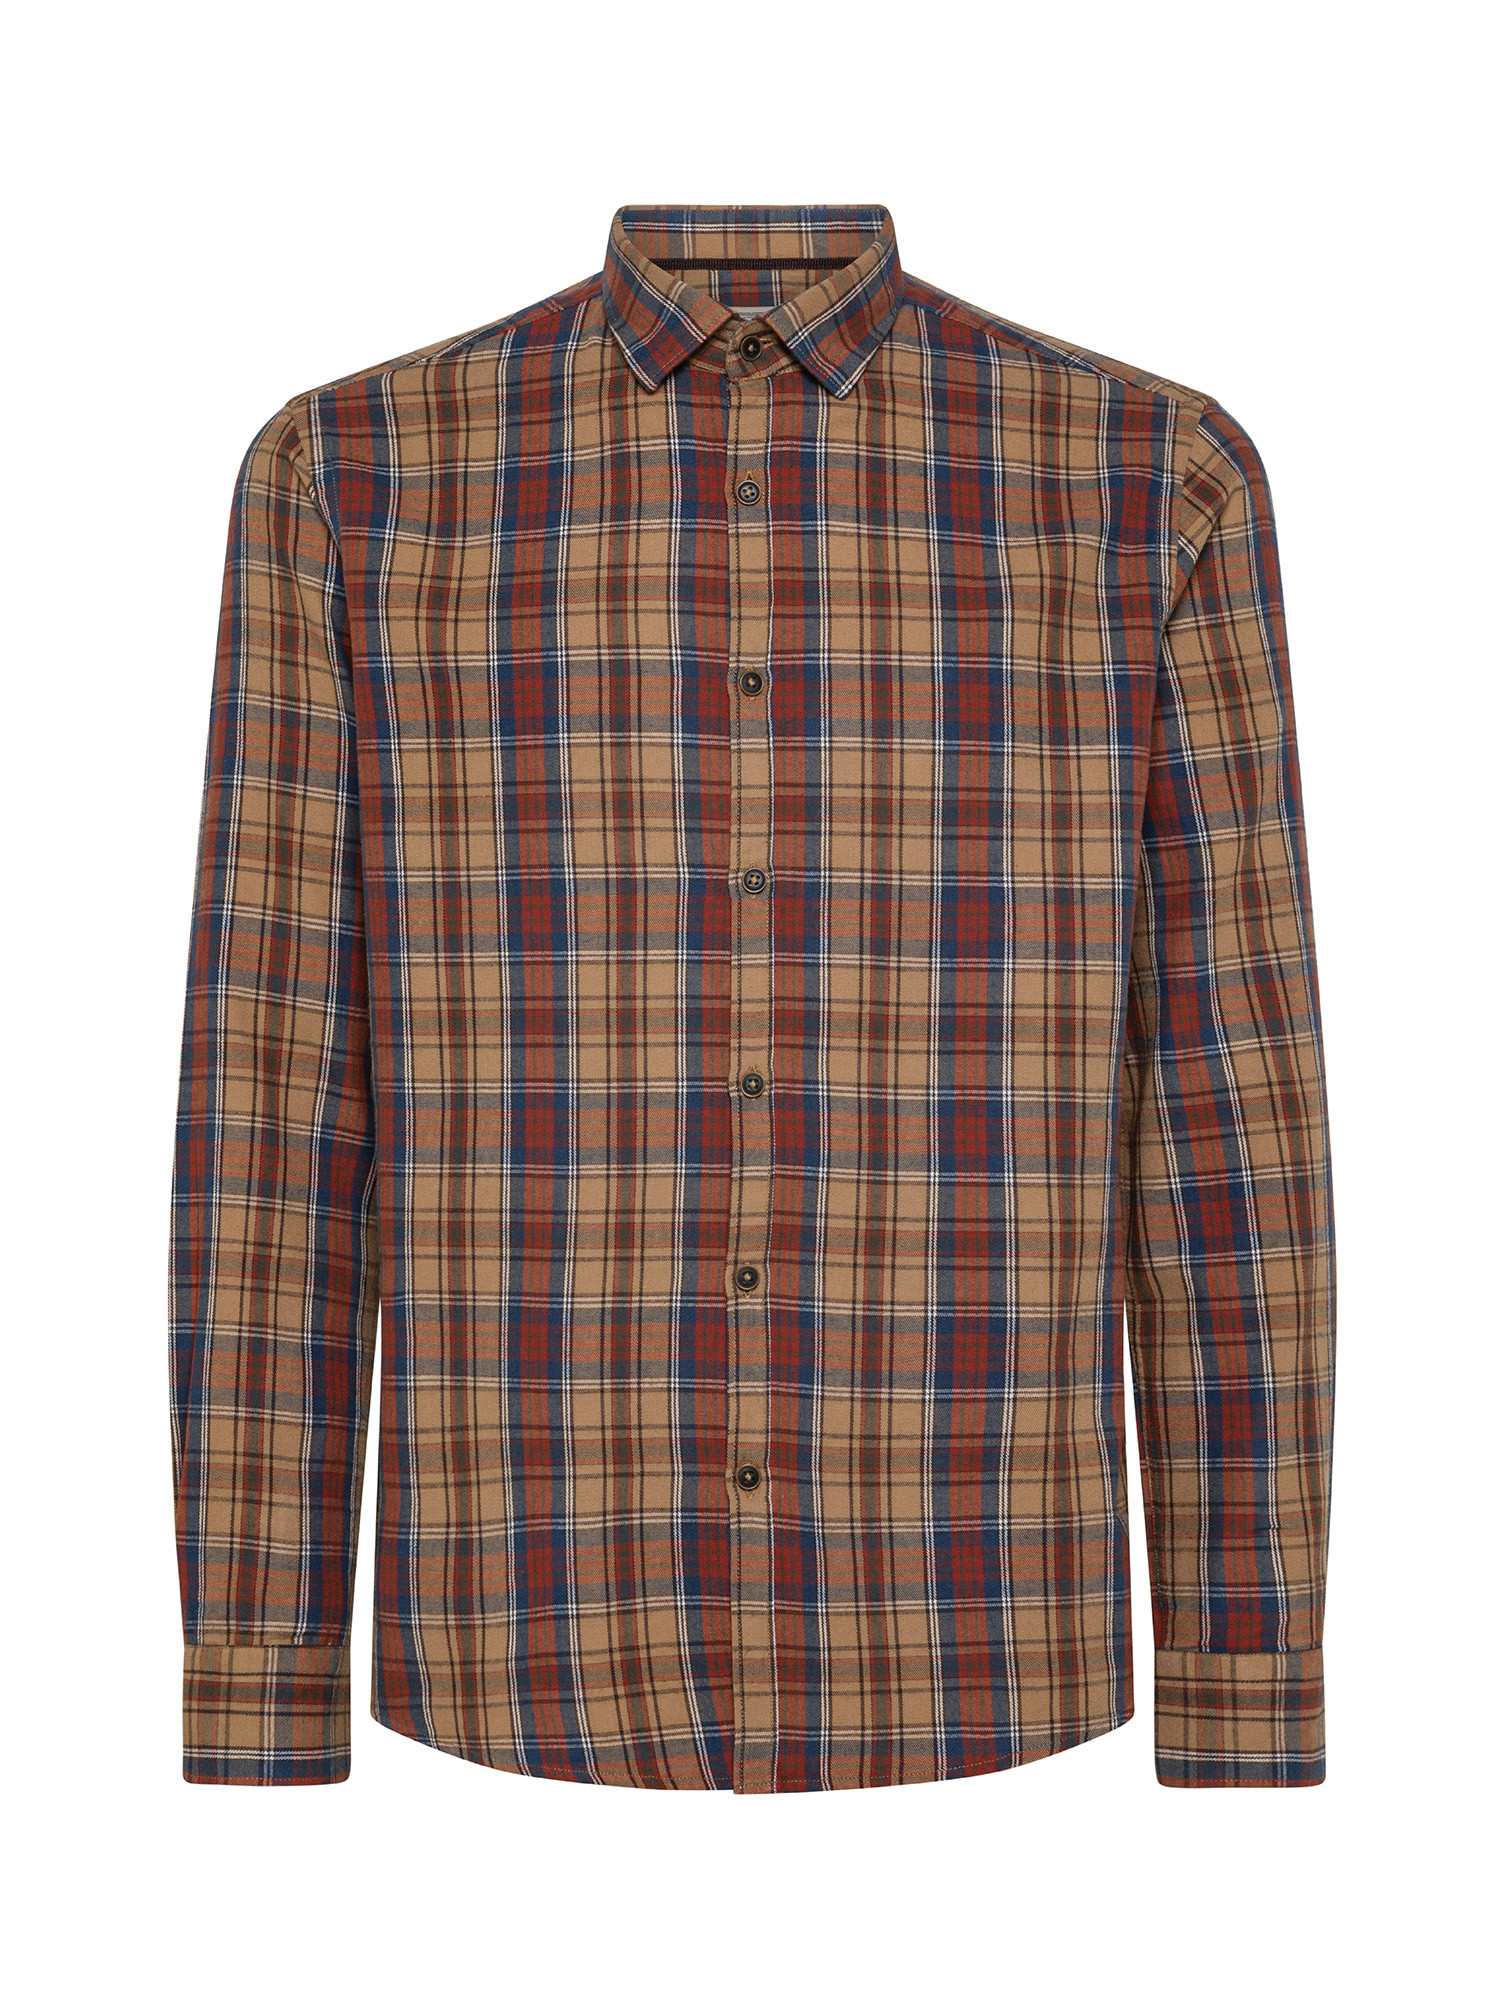 JCT - Checked shirt in soft flannel, Orange, large image number 0